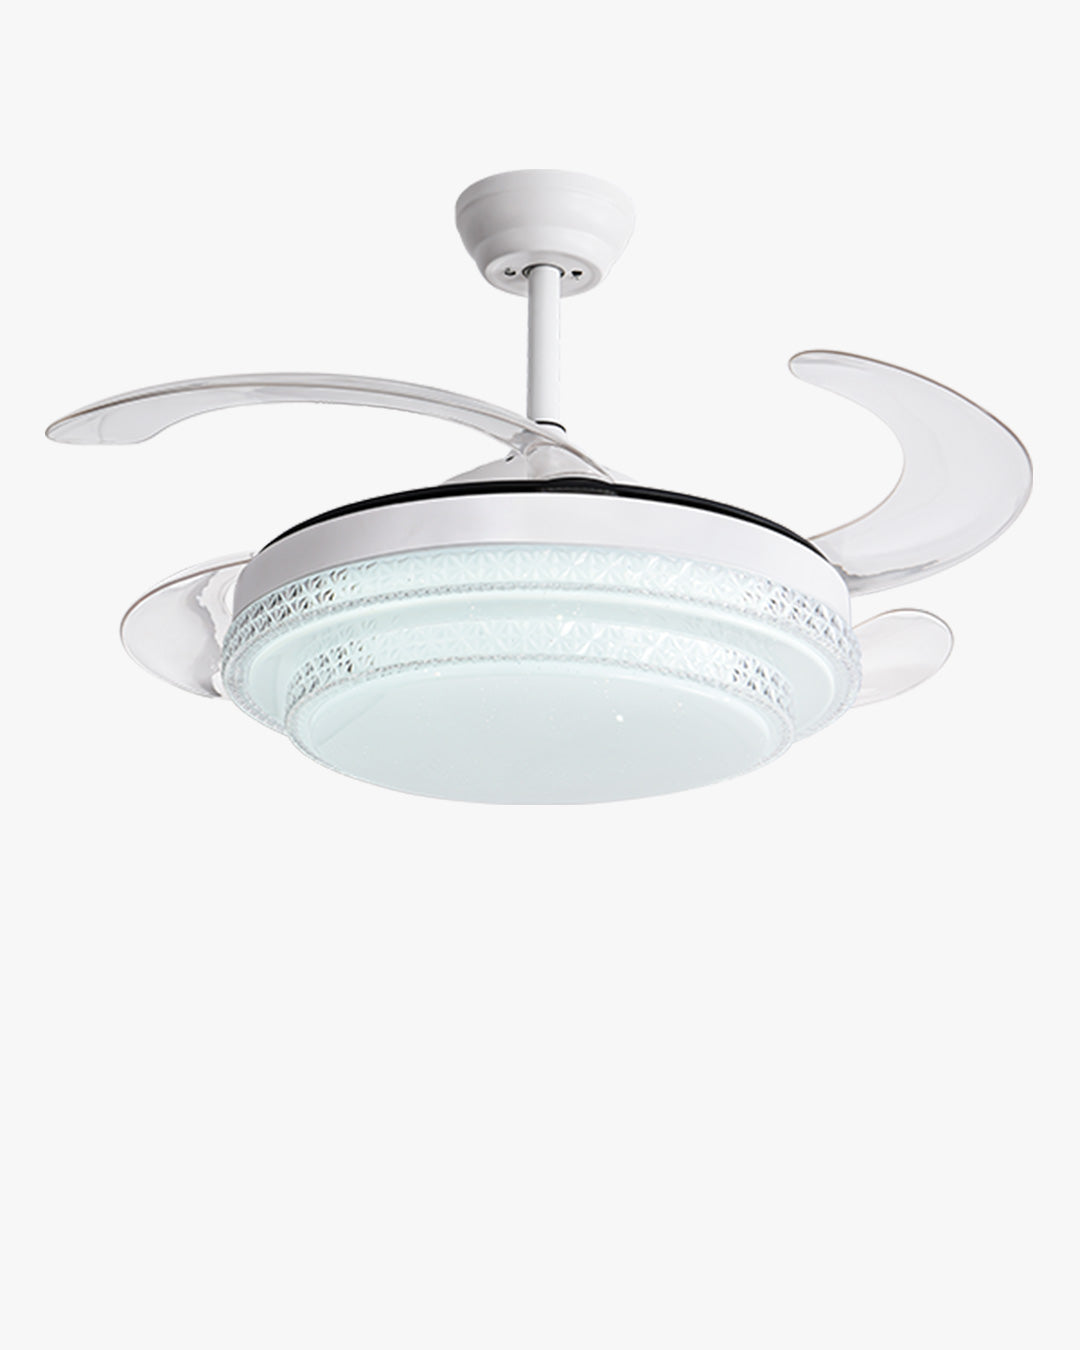 WOMO Remote Hugger Ceiling Fan with Dimmable Light-WM5038